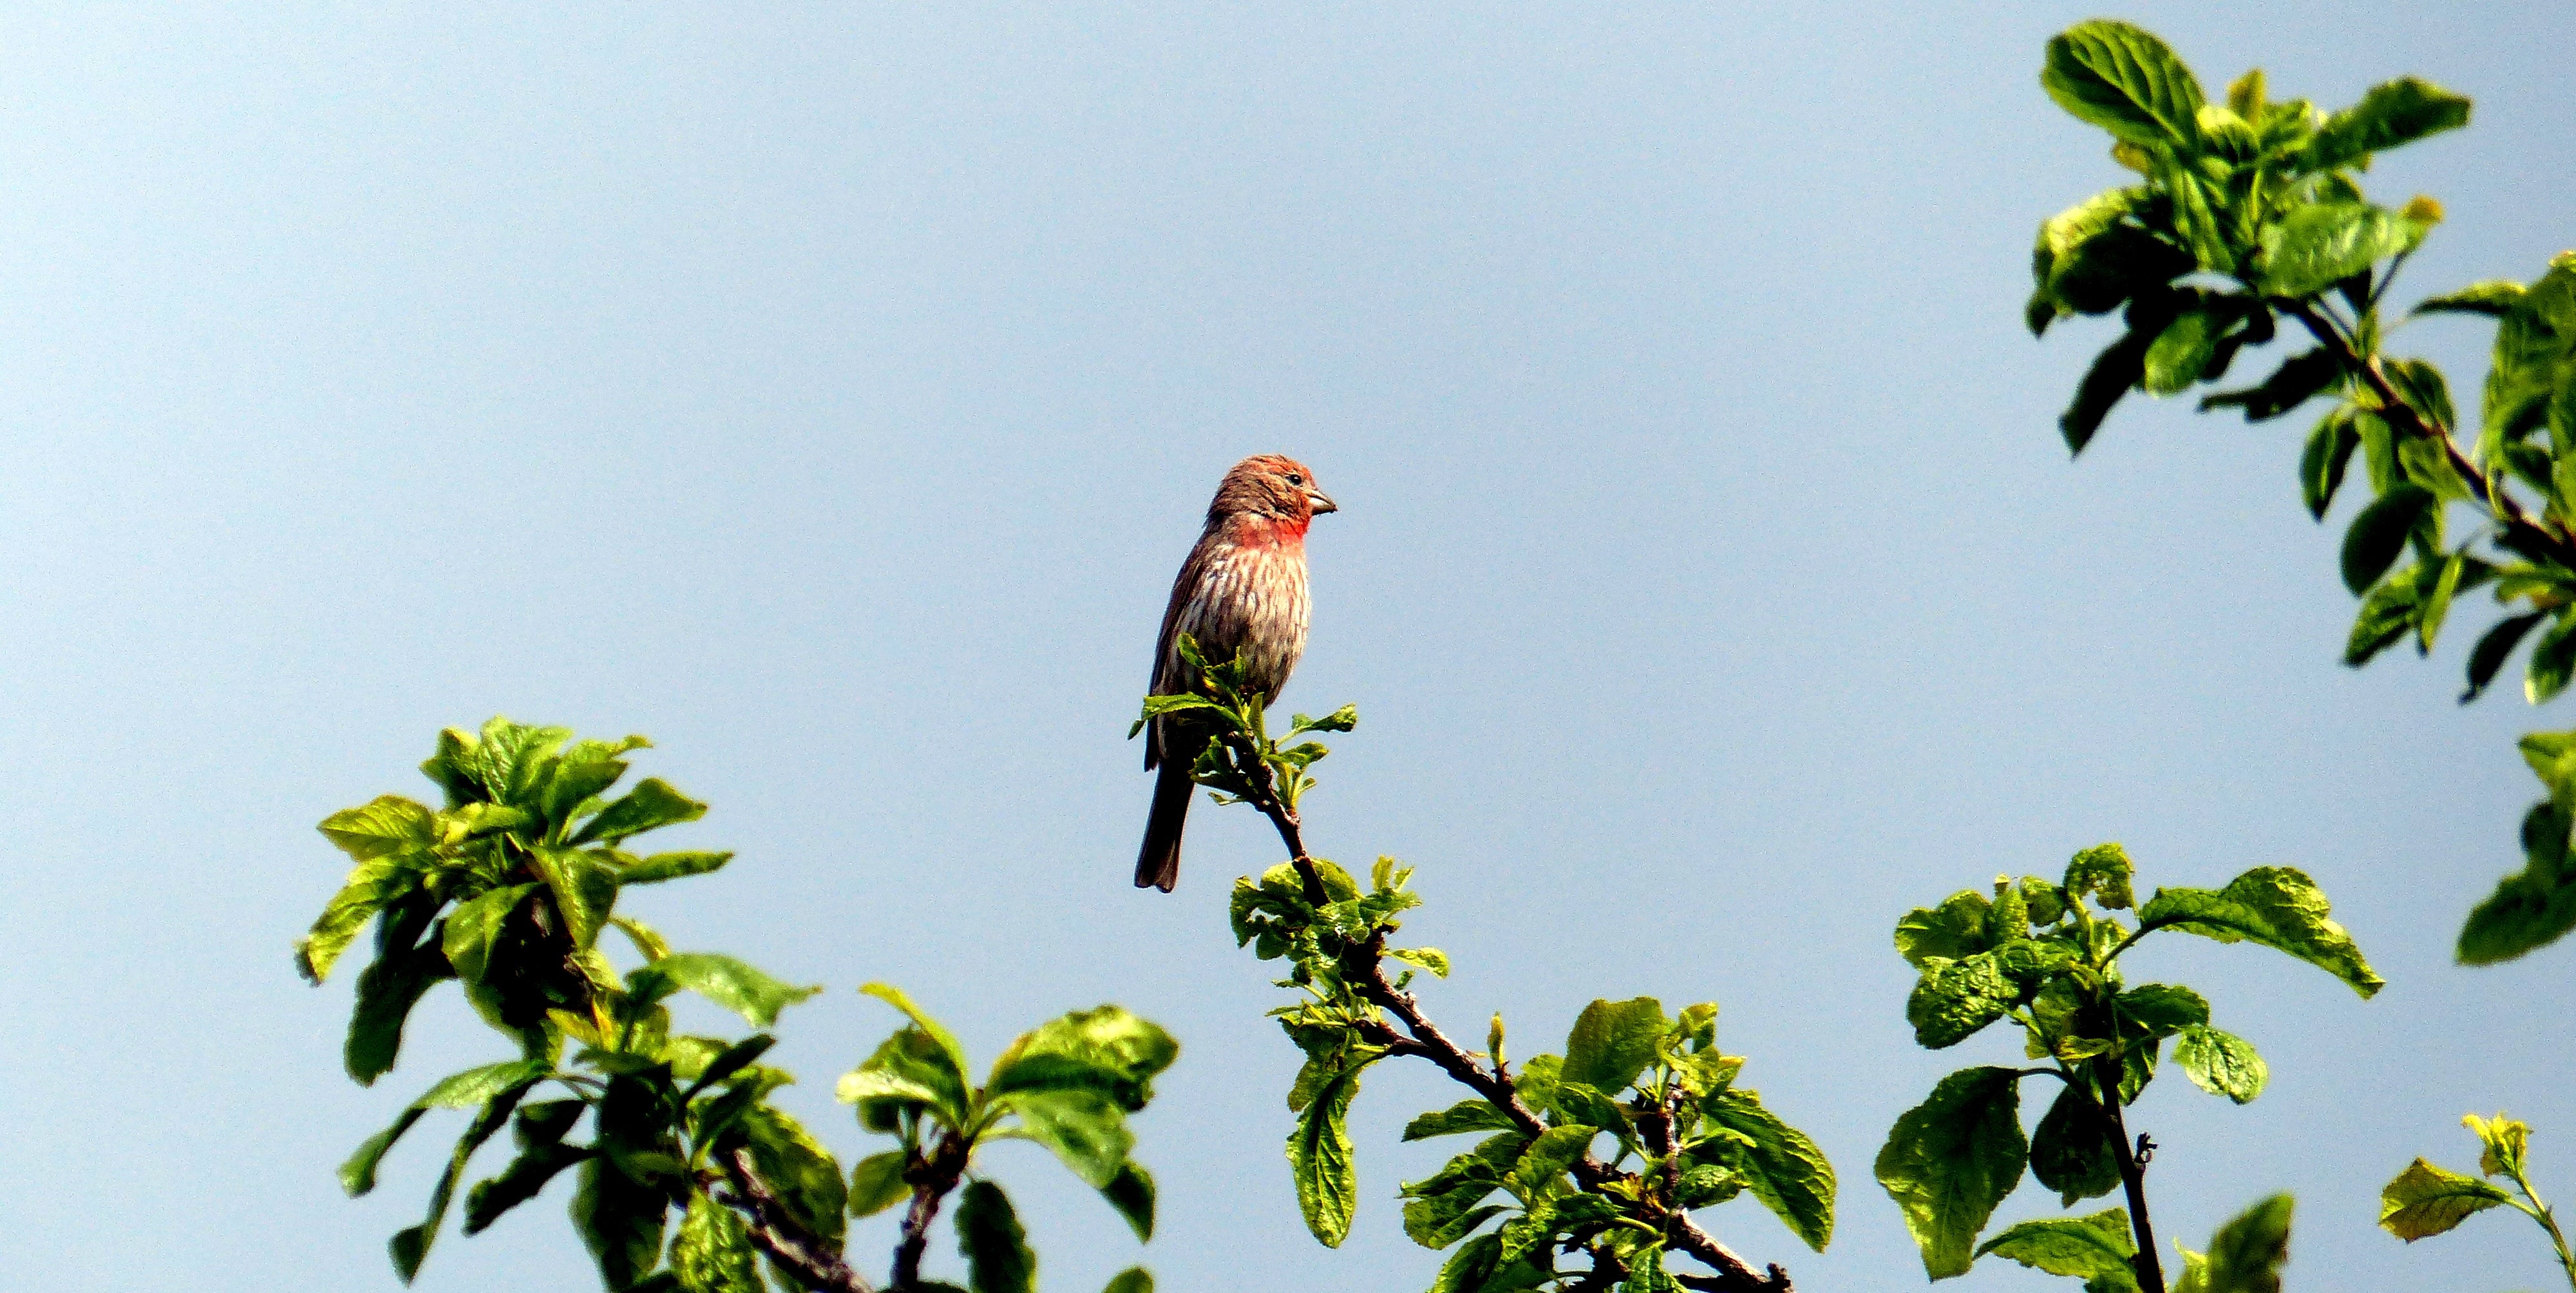 red and brown short beak bird perched green leaf tree during daytime